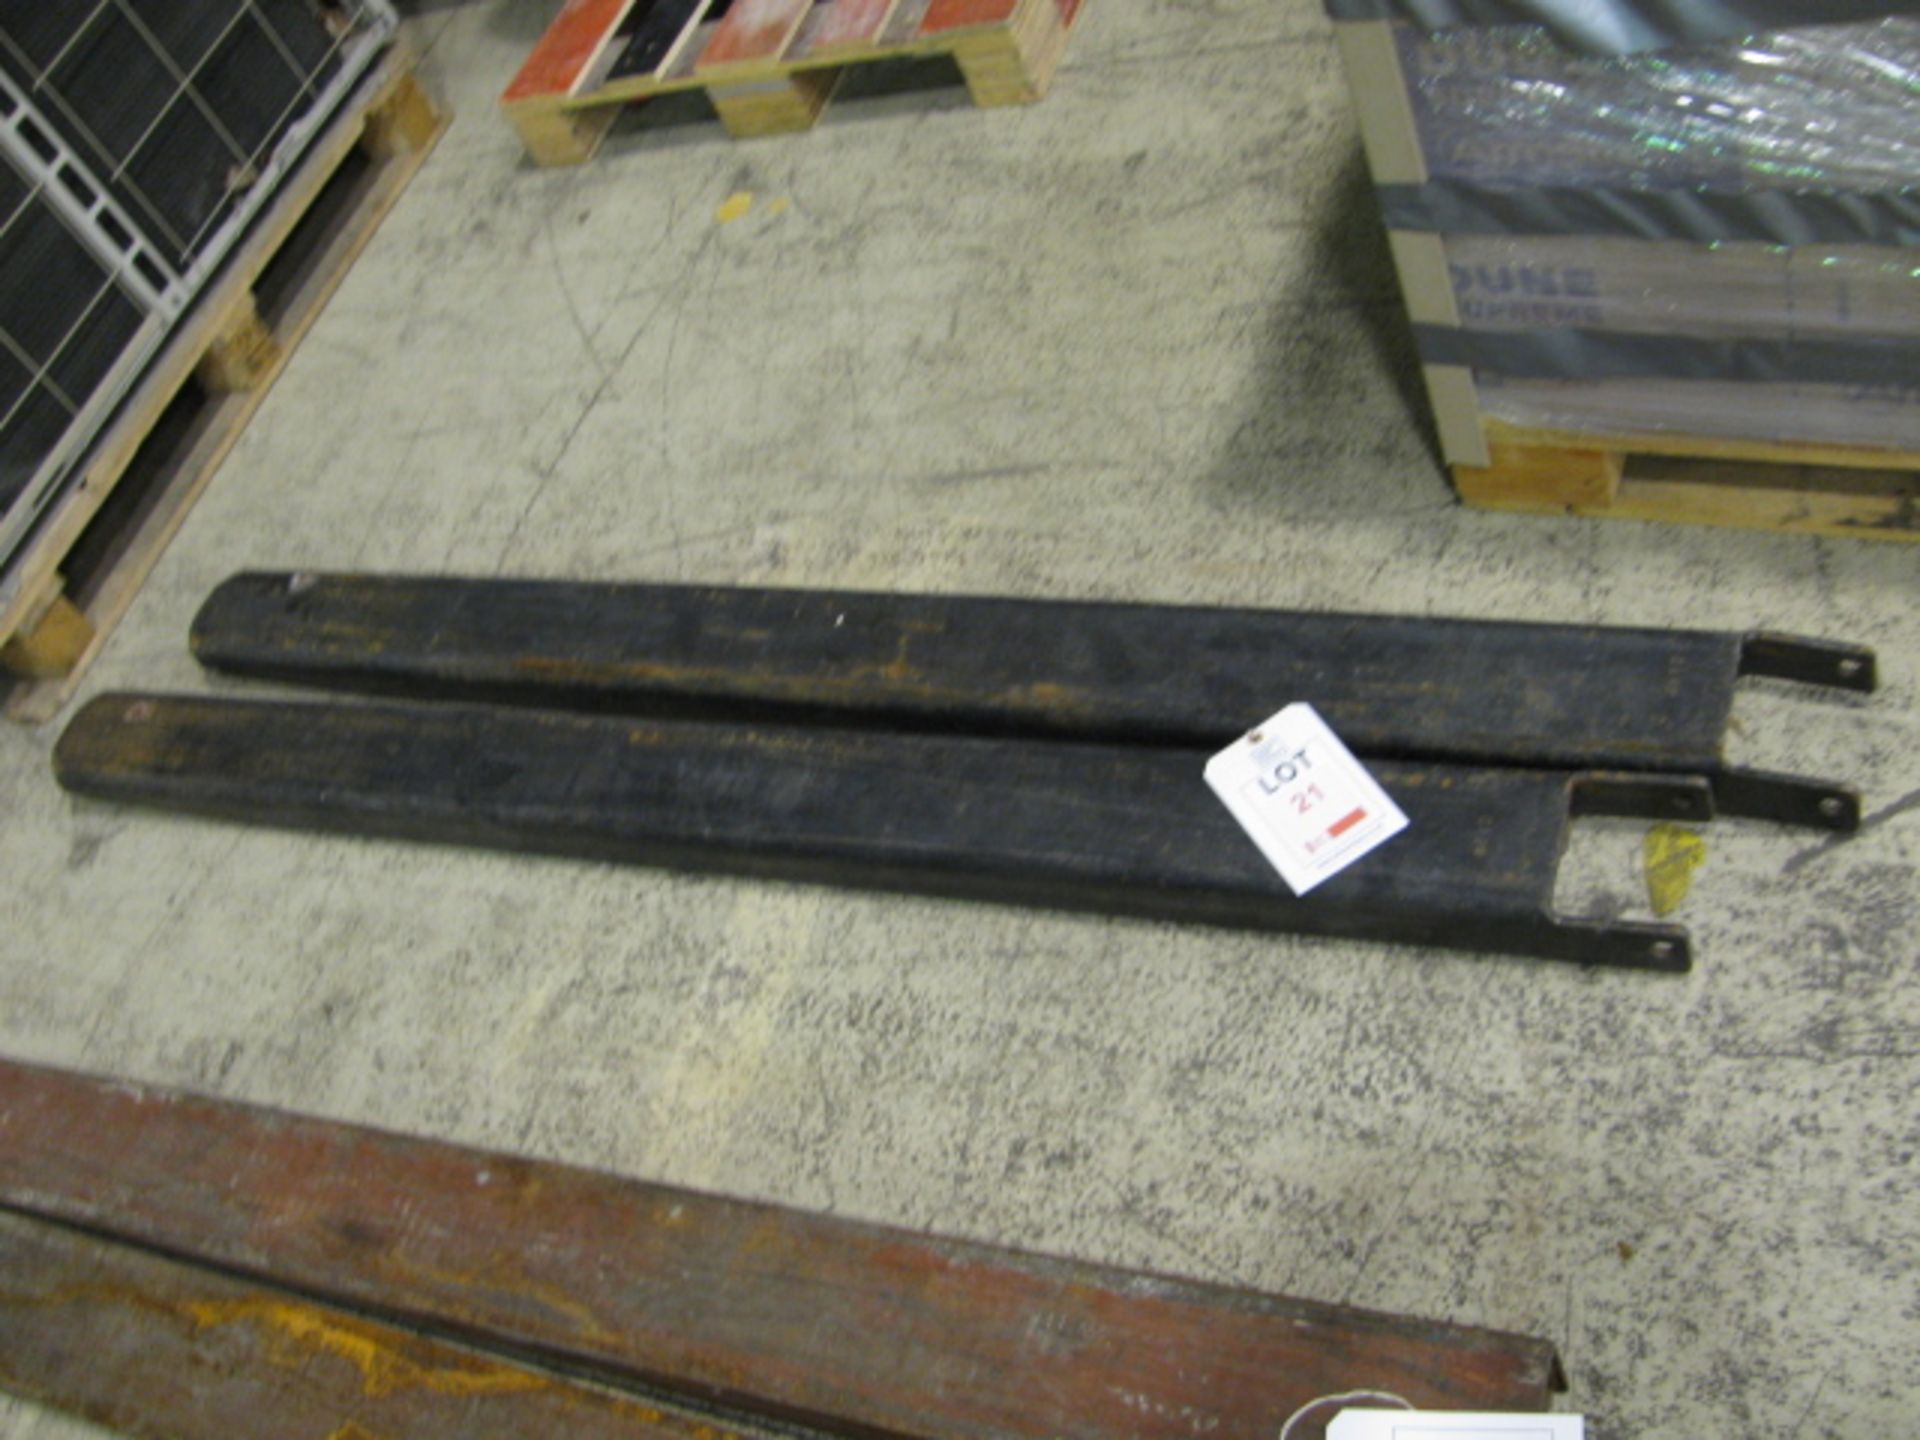 Pair of 2m fork extensions. NB. This item has no record of Thorough Examination. The purchaser